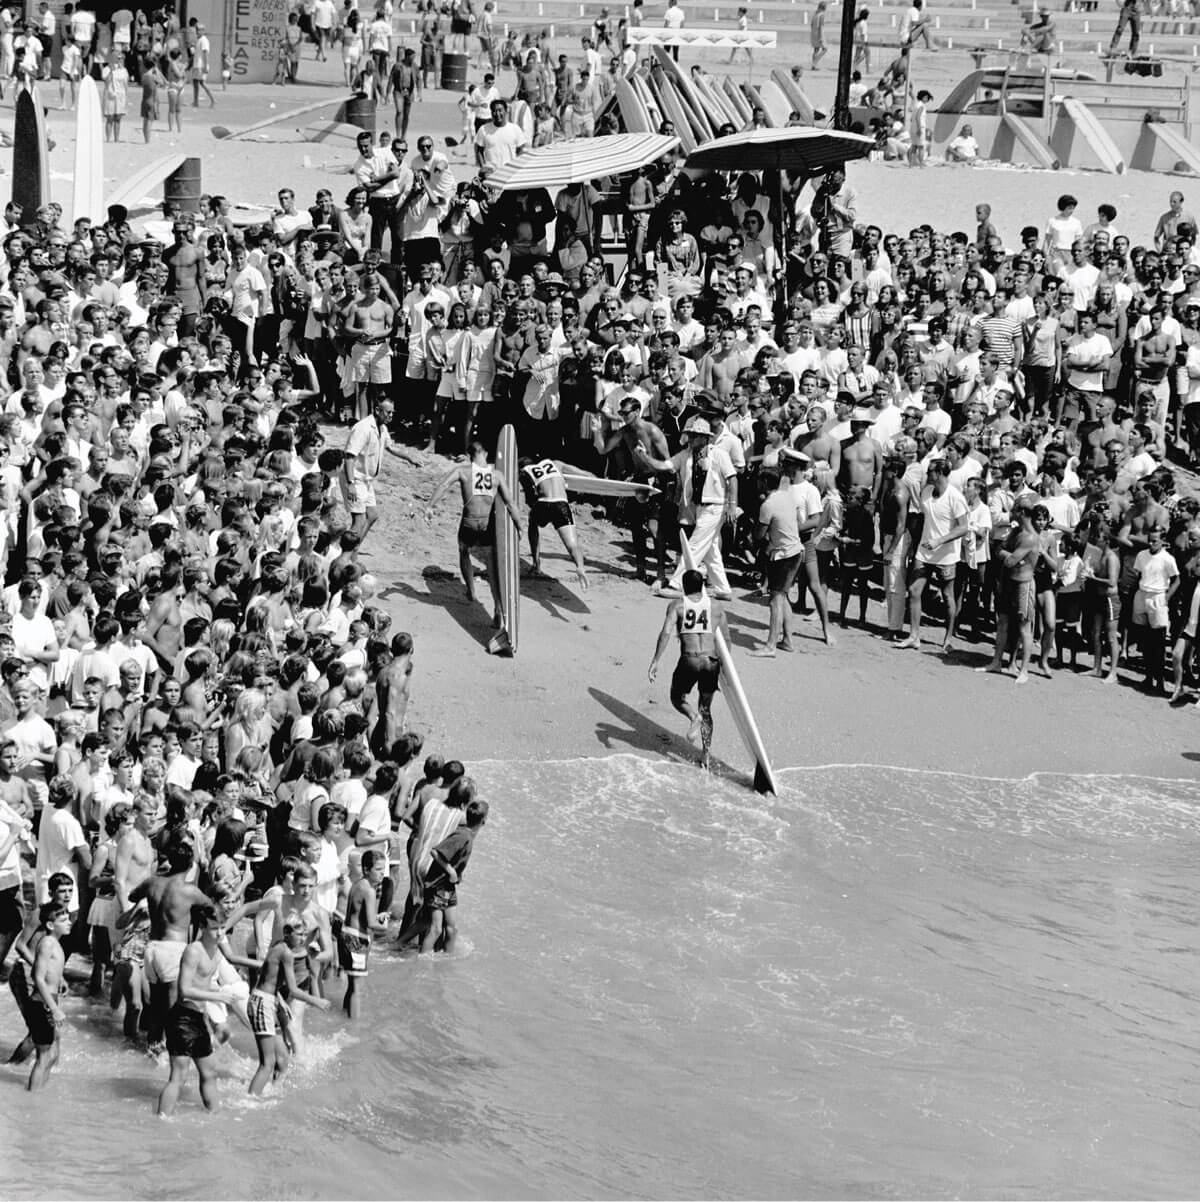 Surfers on crowded beach at a surf competition